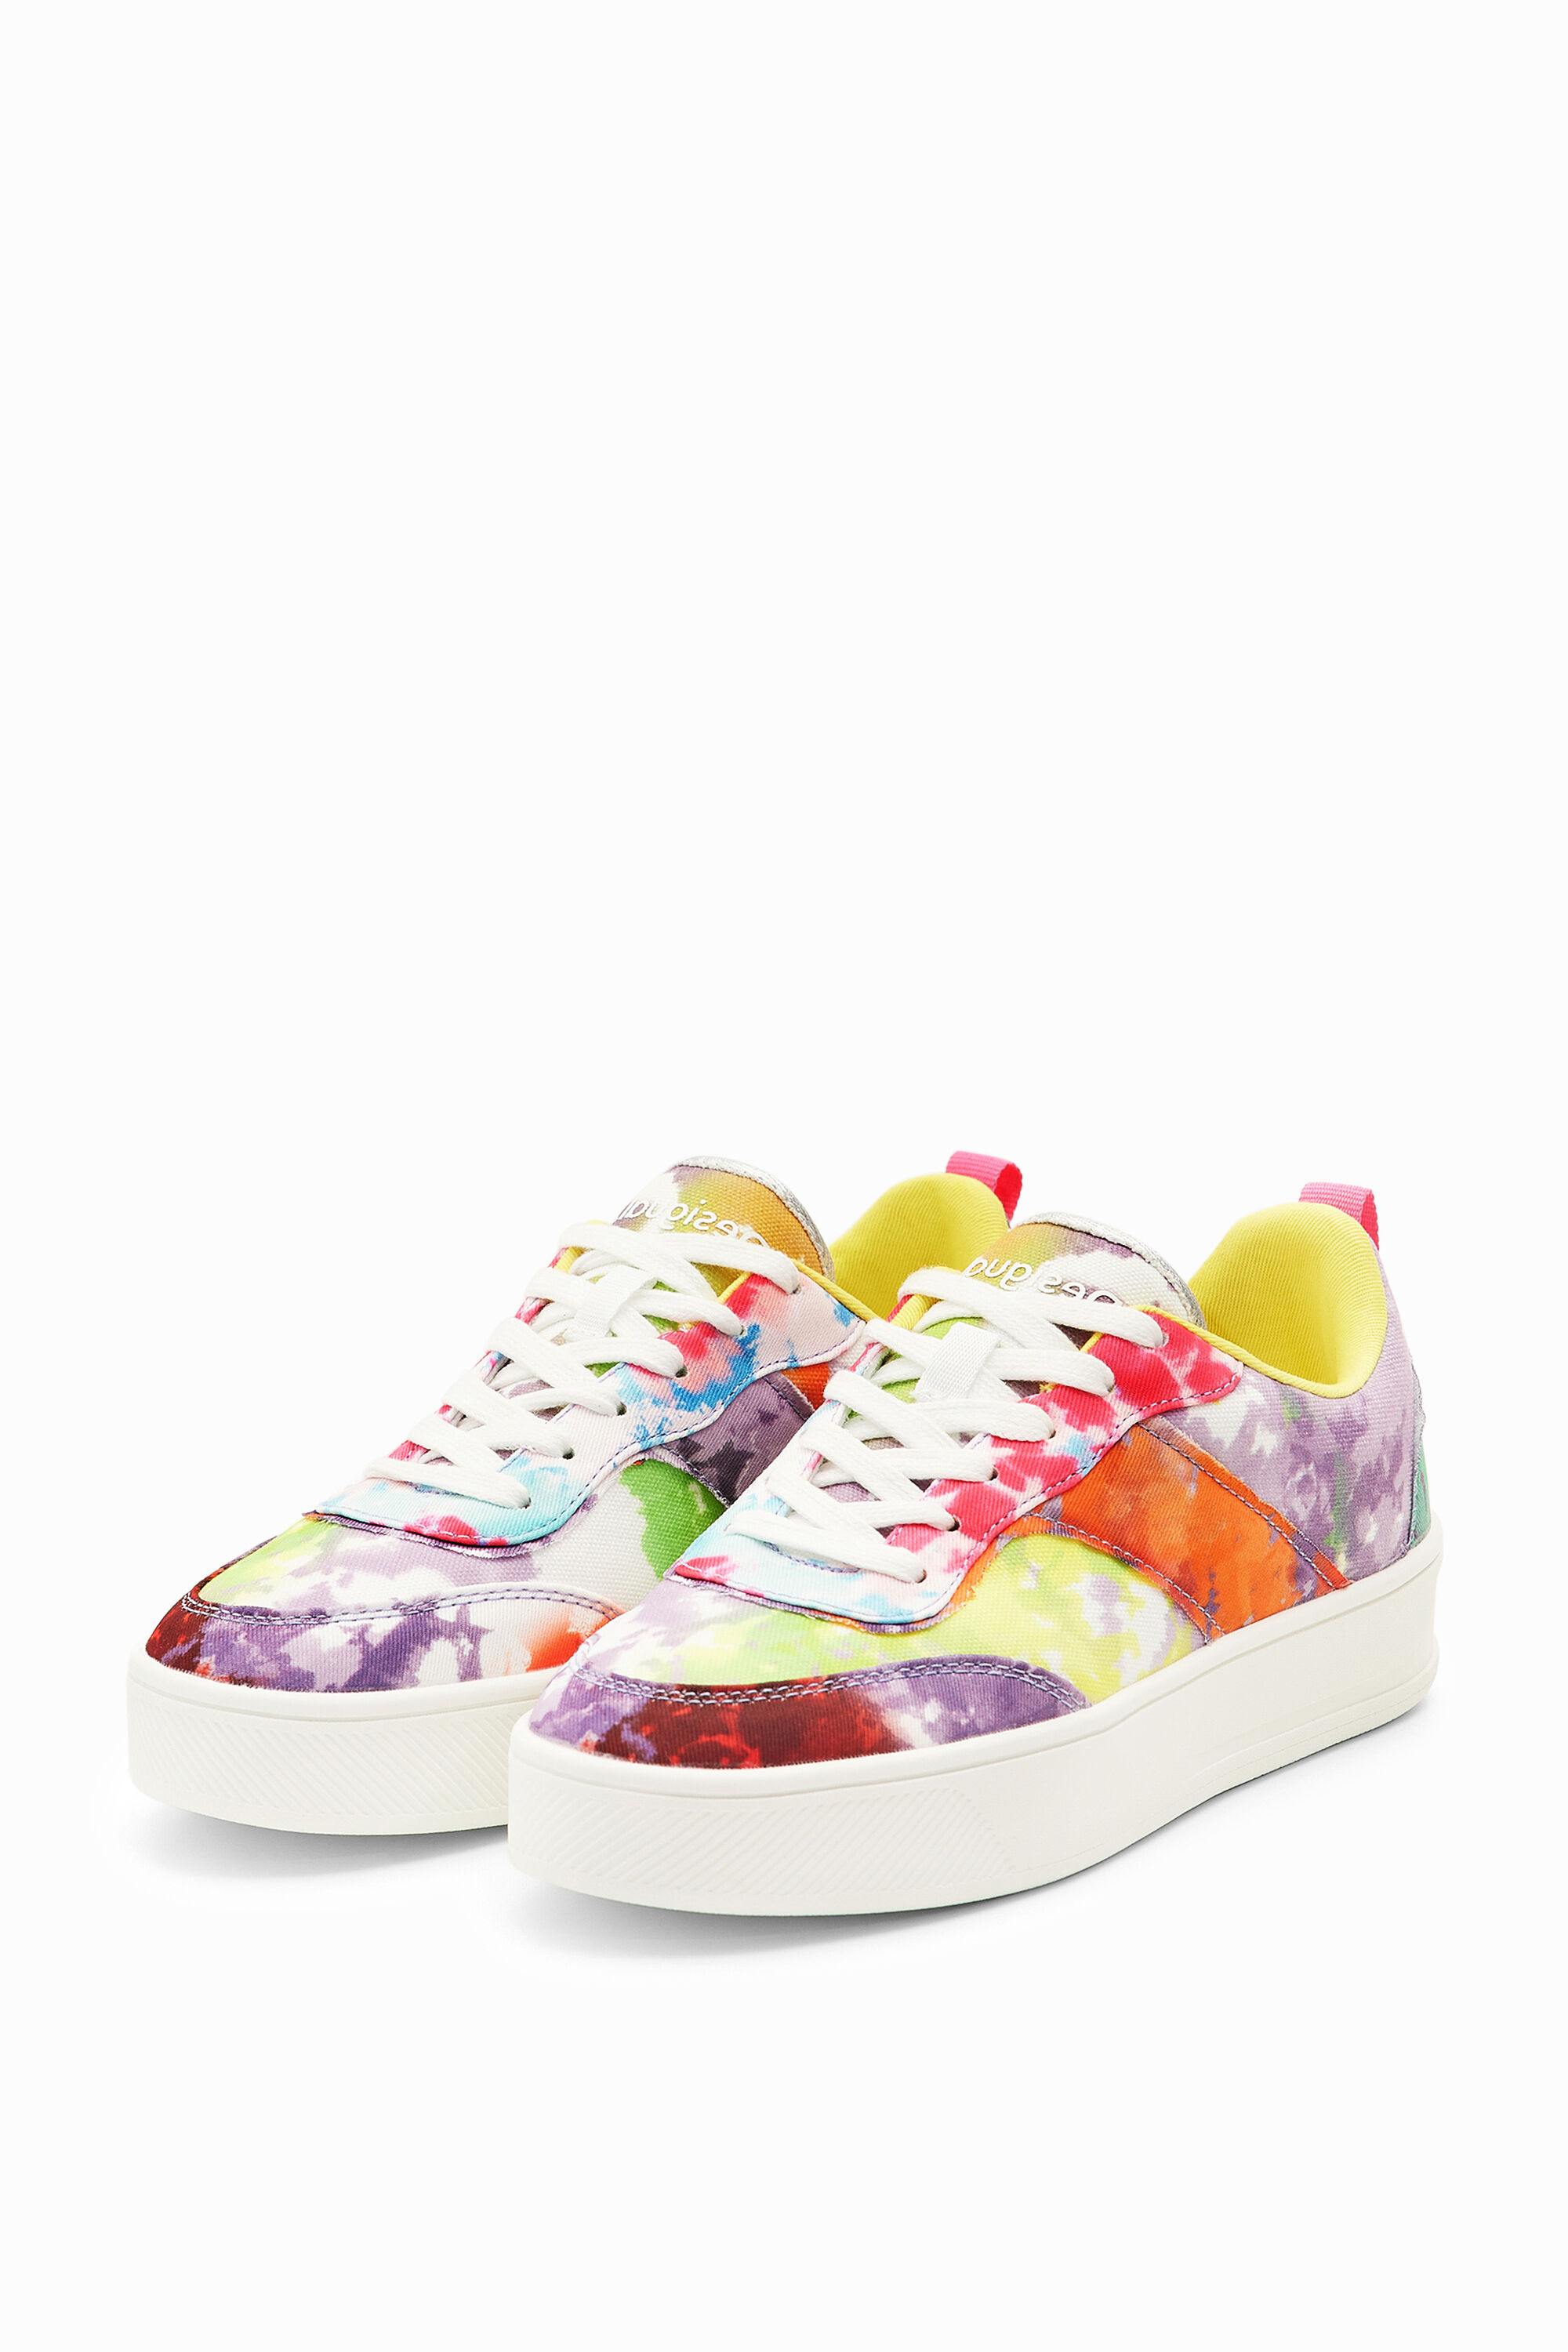 Watercolour patchwork platform sneakers - MATERIAL FINISHES - 38